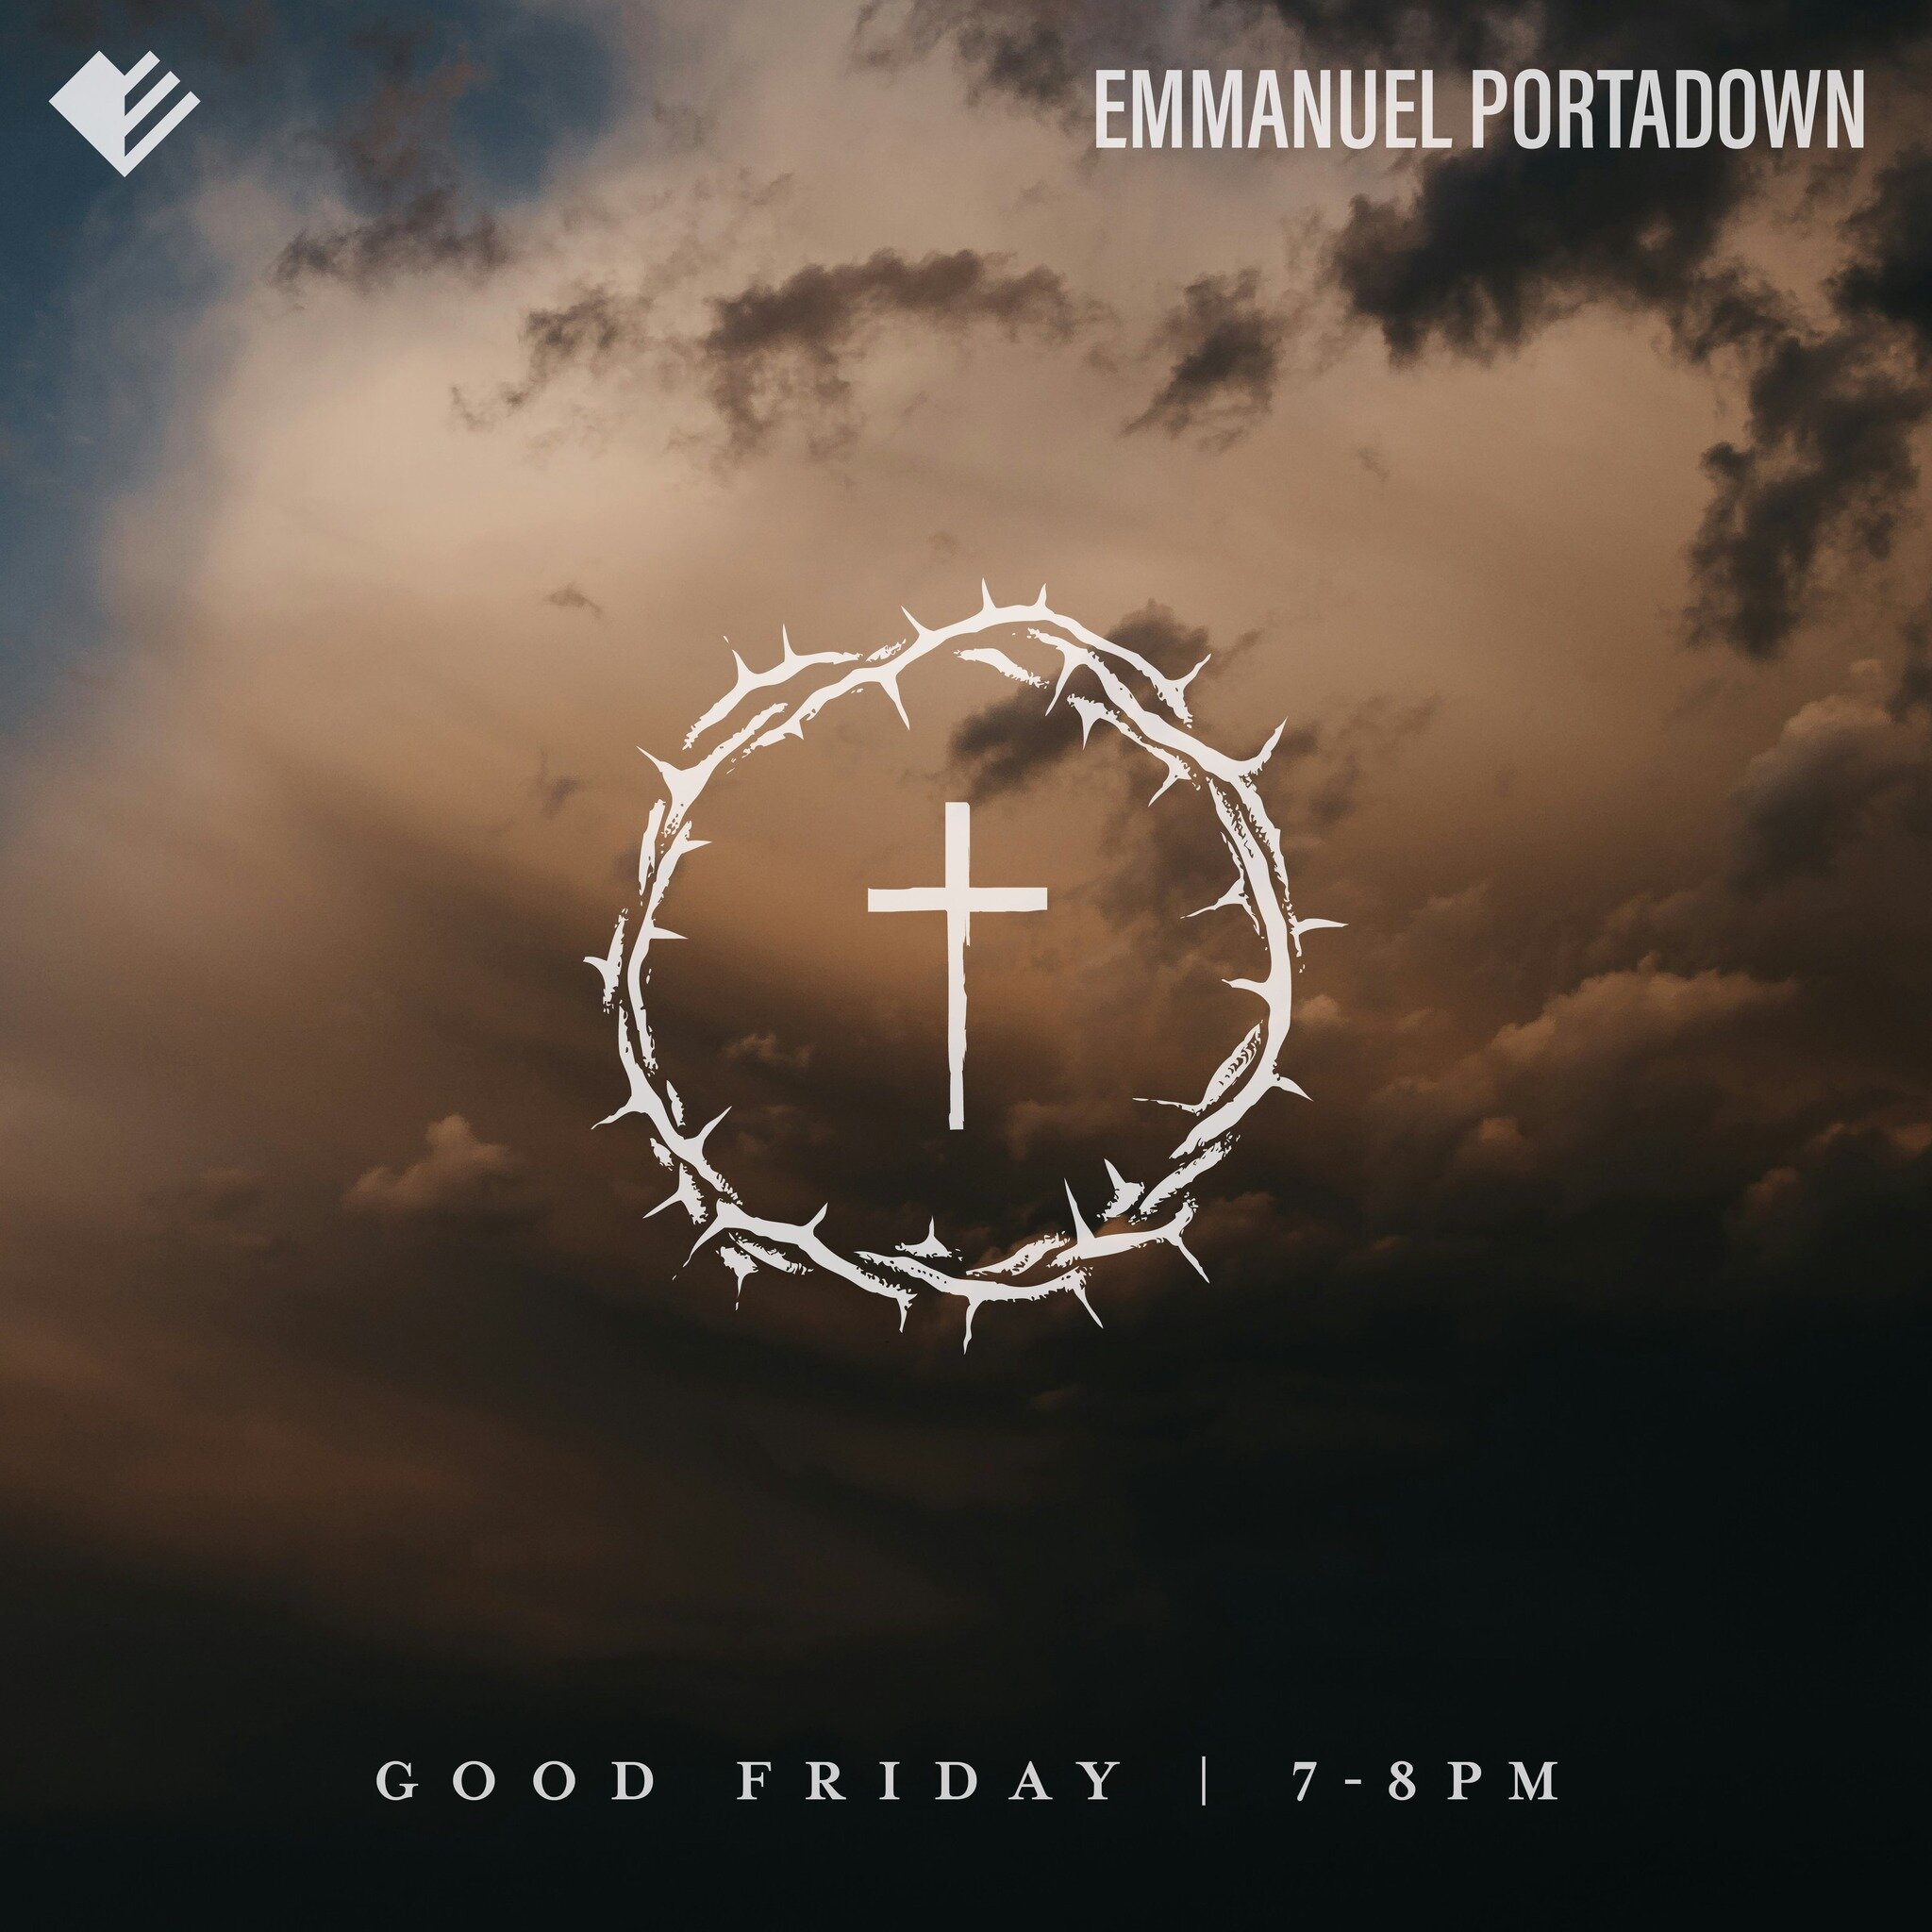 Come take some time with family and friends this Good Friday, 7-8pm in Emmanuel Portadown. We will be taking communion together, worshipping and creating space to reflect upon Jesus' final moments. We will also be together at our usual time of 10.30a